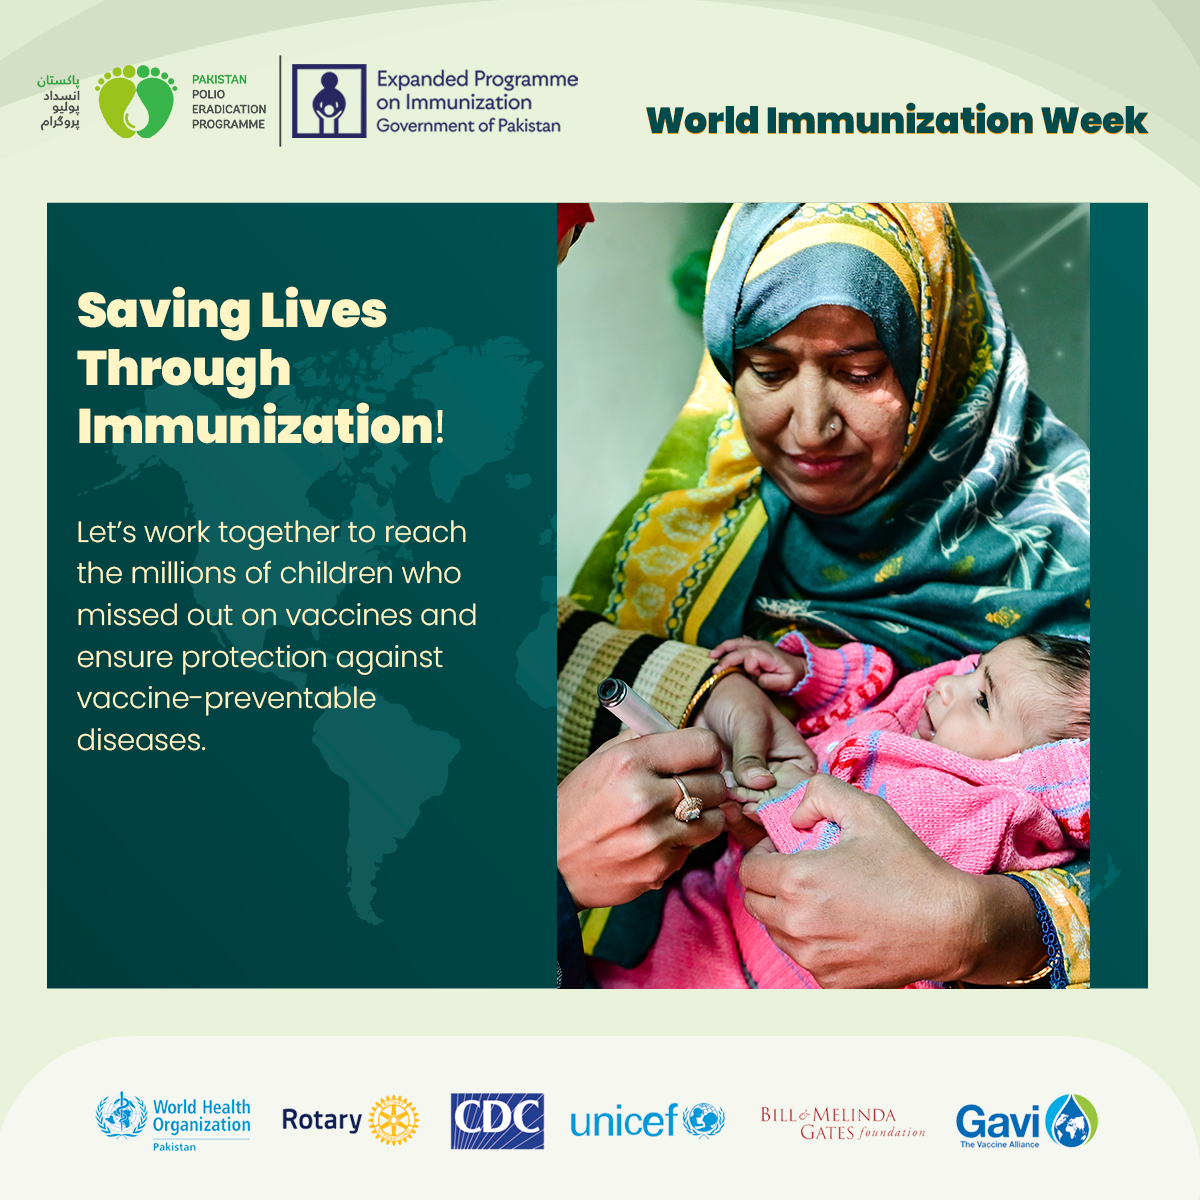 As we celebrate #WorldImmunizationWeek, let's reaffirm our commitment to leaving no child behind. Together, we can write the final chapter in Pakistan's polio eradication story. We extend our sincere appreciation to the @GovtofPakistan, political leadership, our esteemed donors…